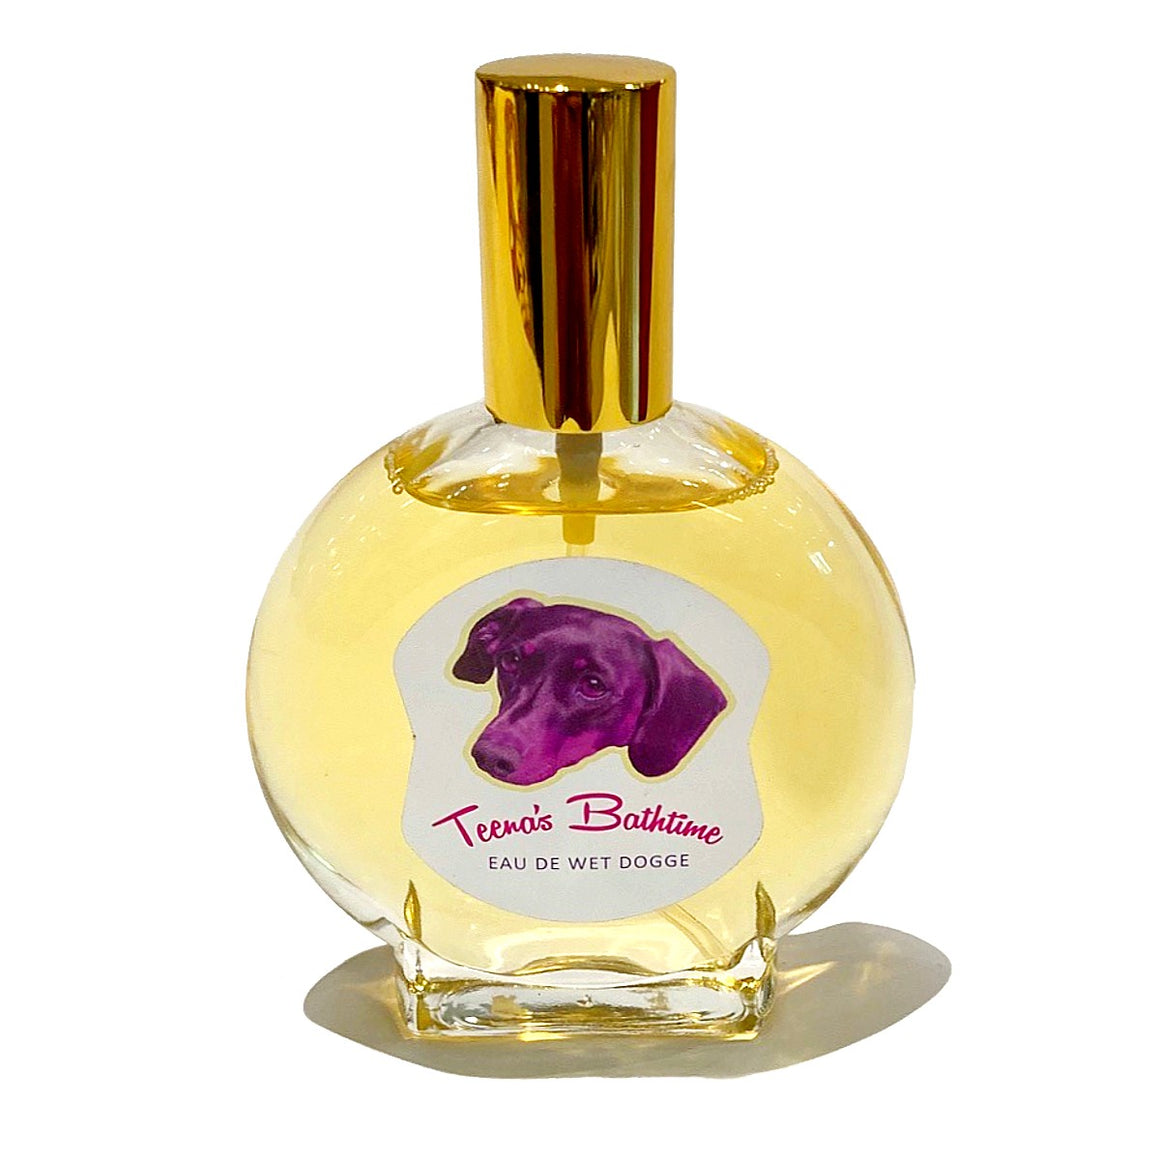 A Round perfume bottle with a gold lid. A label on the perfume bottle shows a photo of a black and tan dachshund rendered in pink and text states "Teena's Bathtime Eau De Wet Dogge"